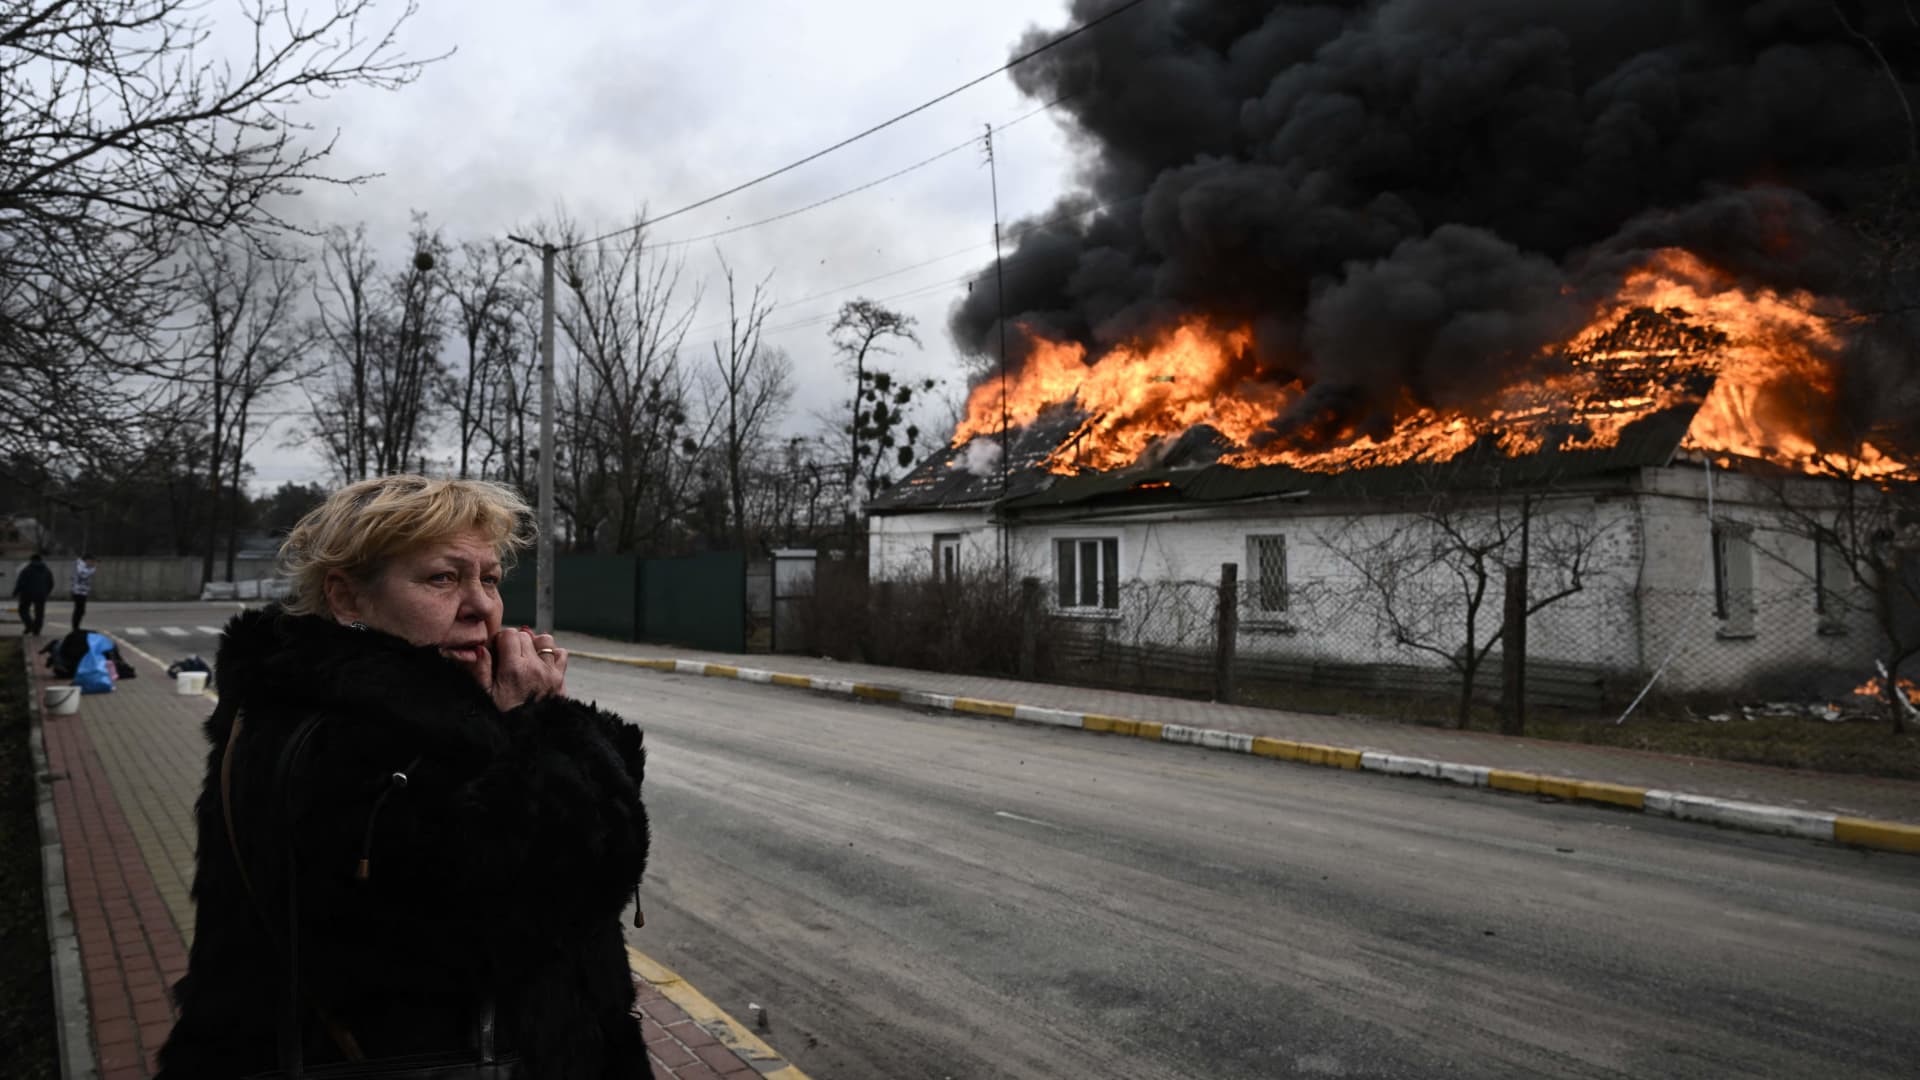 A woman reacts as she stands in front of a house burning after being shelled in the city of Irpin, outside Kyiv, on March 4, 2022.